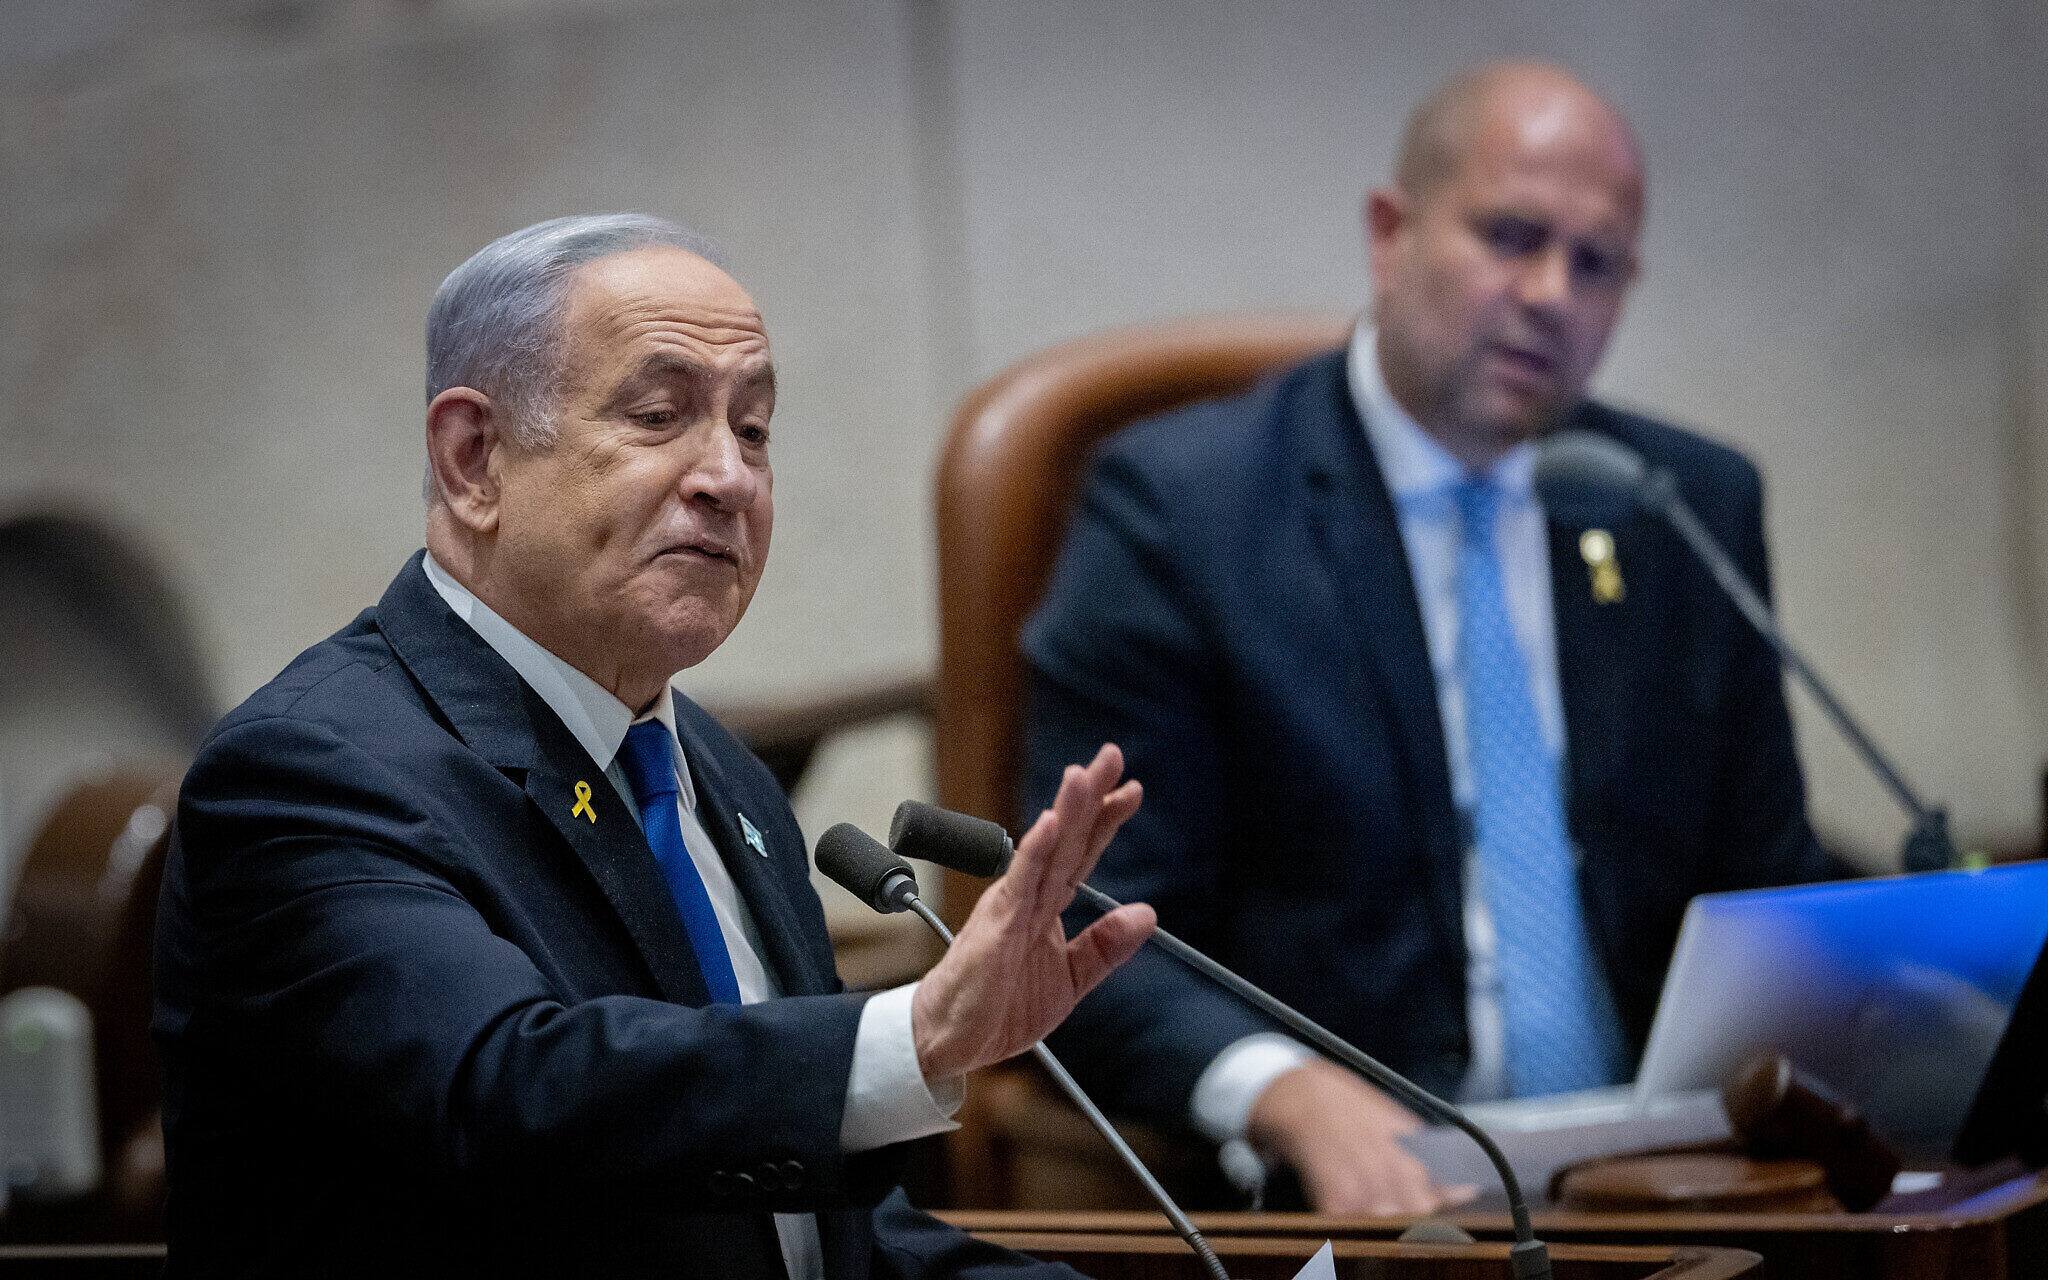 Netanyahu: "Israel very close to its goals" -- PM vows